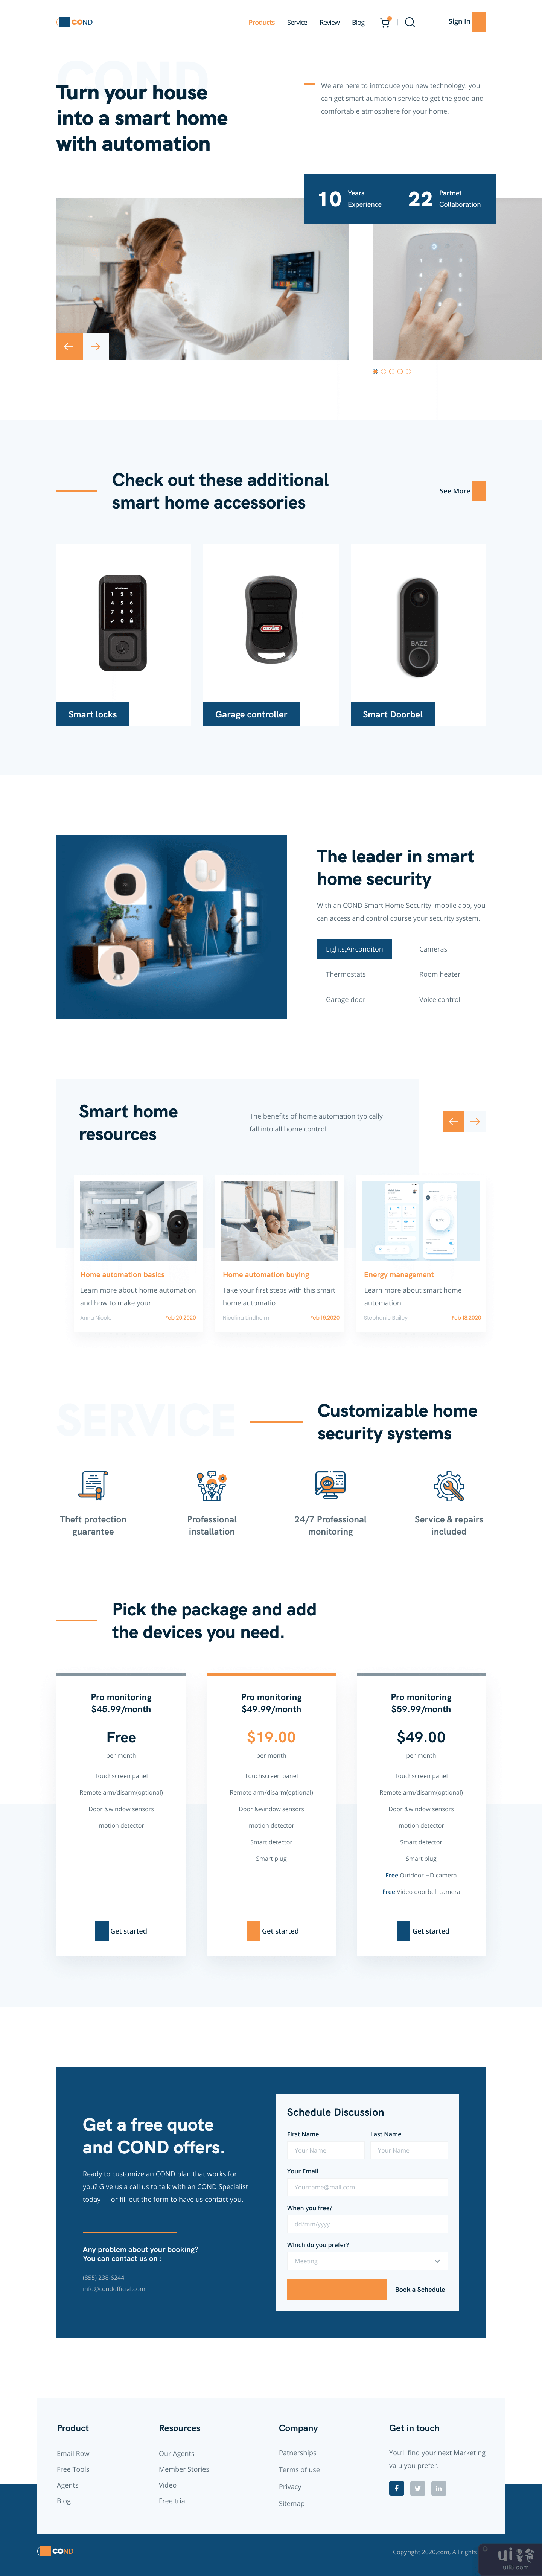 COND - 家庭自动化服务登陆页面(COND - Home Automation Service Landing Page)插图